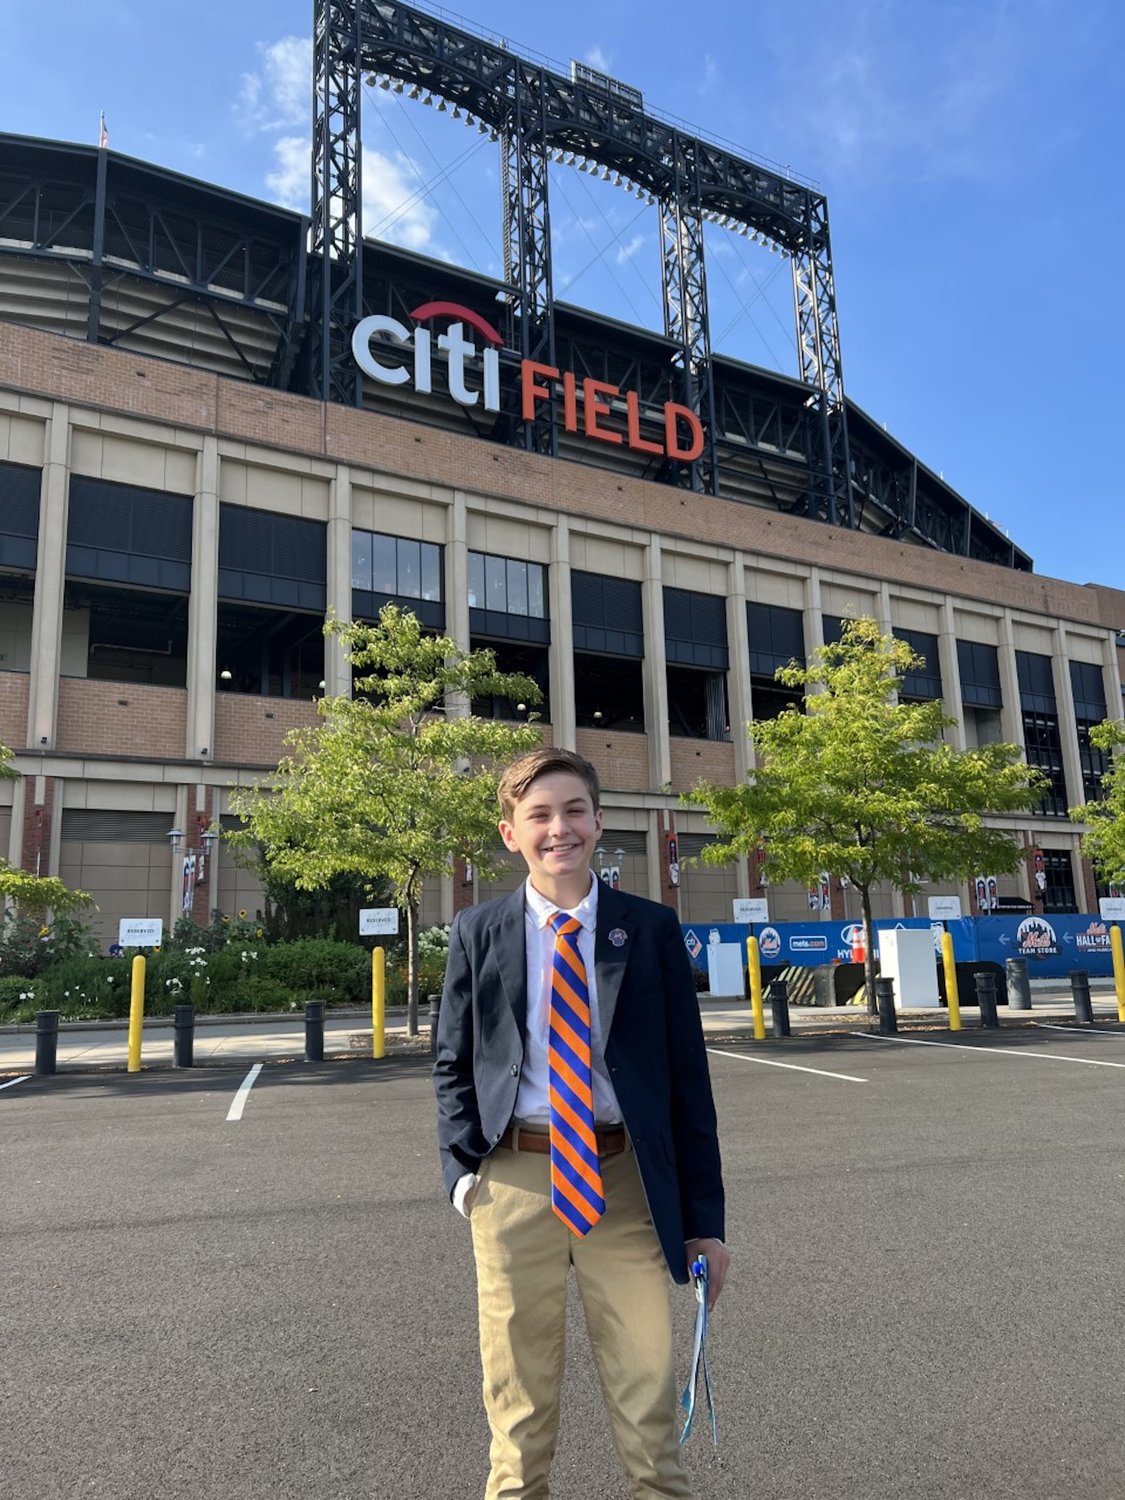 Eddie Kraus, 12, of North Bellmore, was SportsNet New York’s 2022 Kidcaster. Two weeks ago he got to call an inning of a Mets game in the broadcast booth with SNY’s Keith Hernandez, Gary Cohen and Ron Darling.